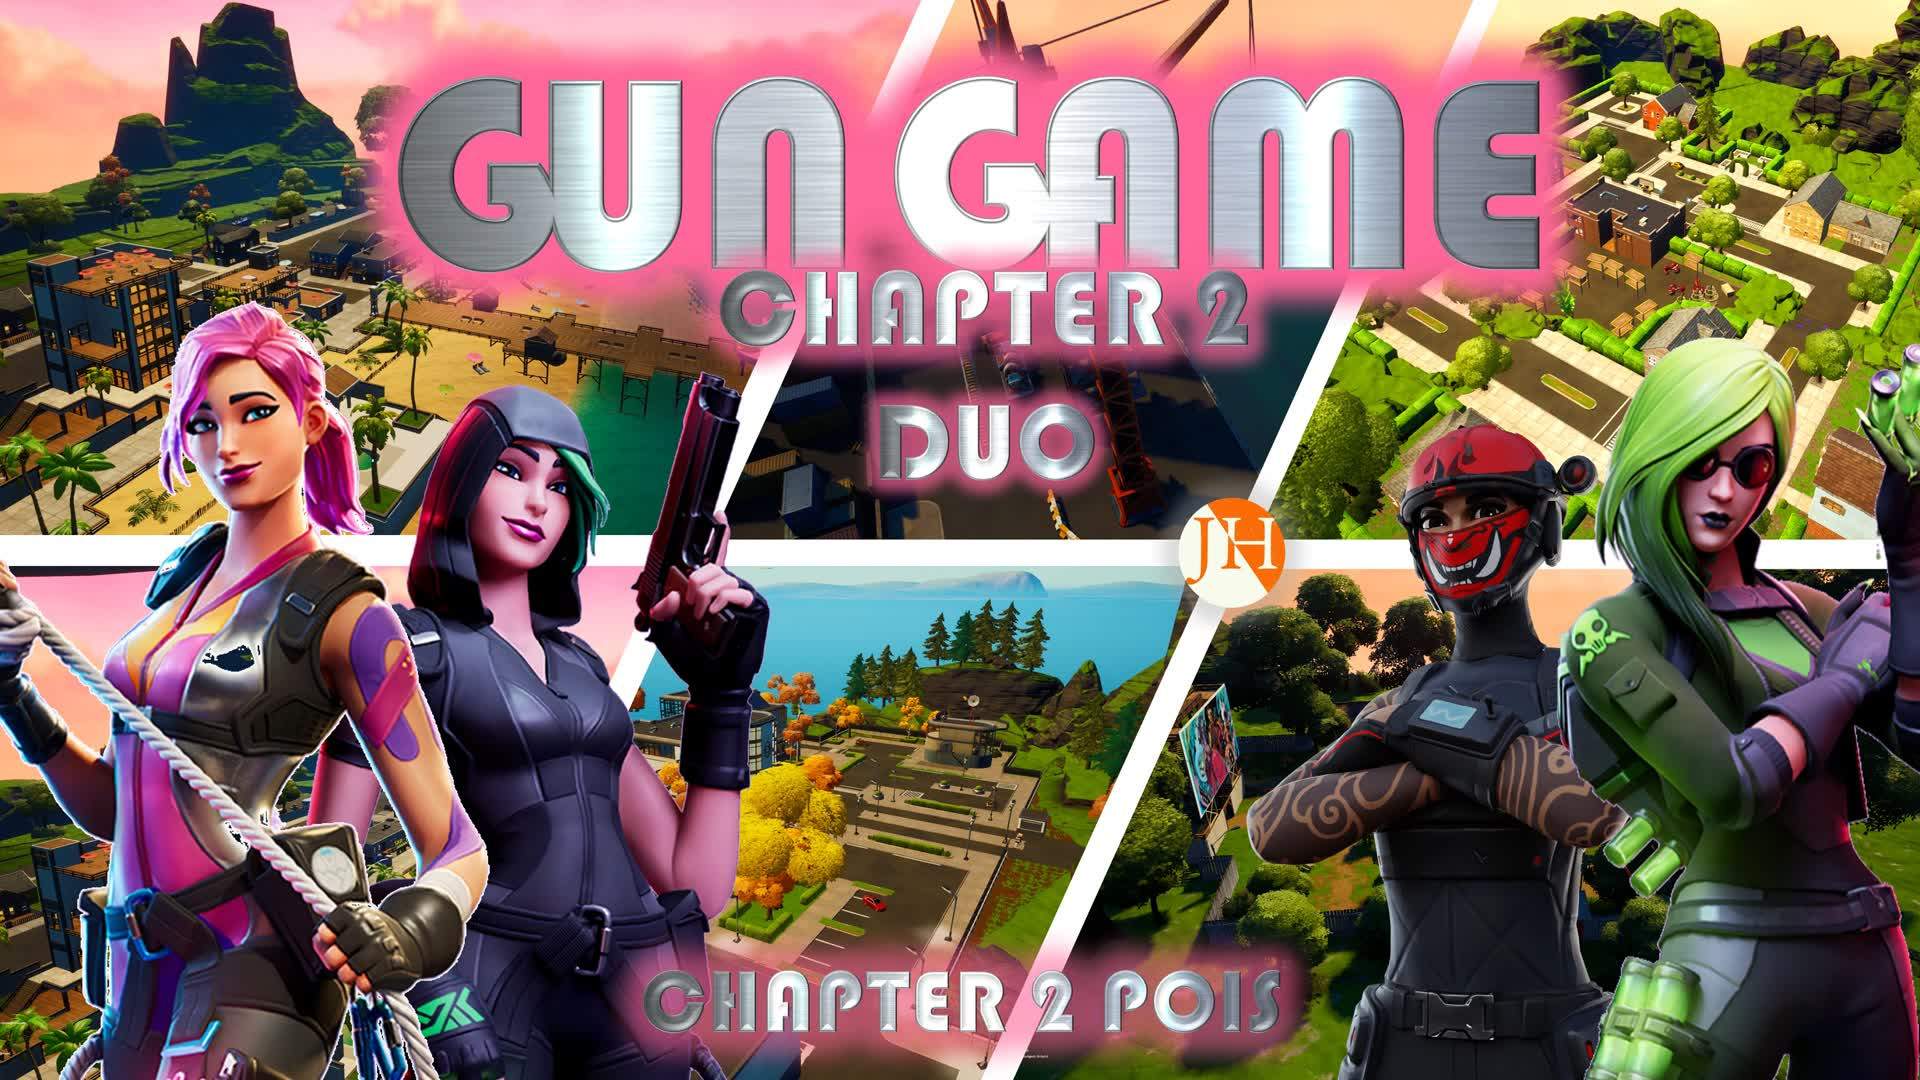 Gungame Duos - Chapter 2 POI´S